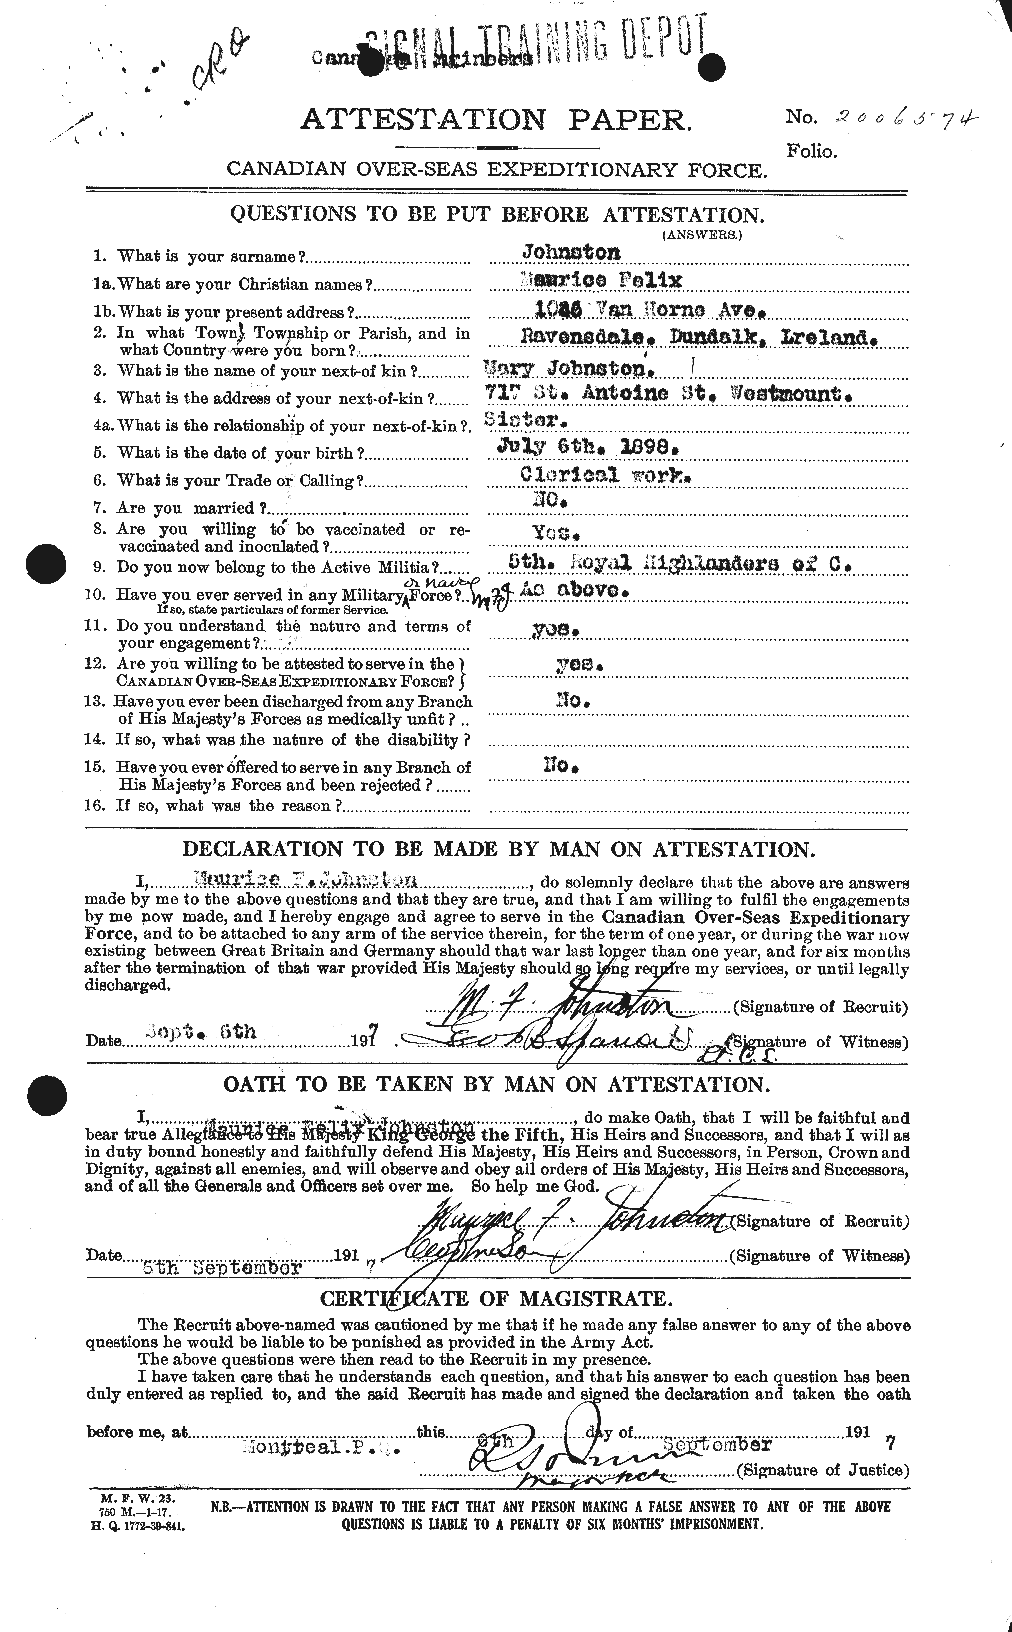 Personnel Records of the First World War - CEF 422980a